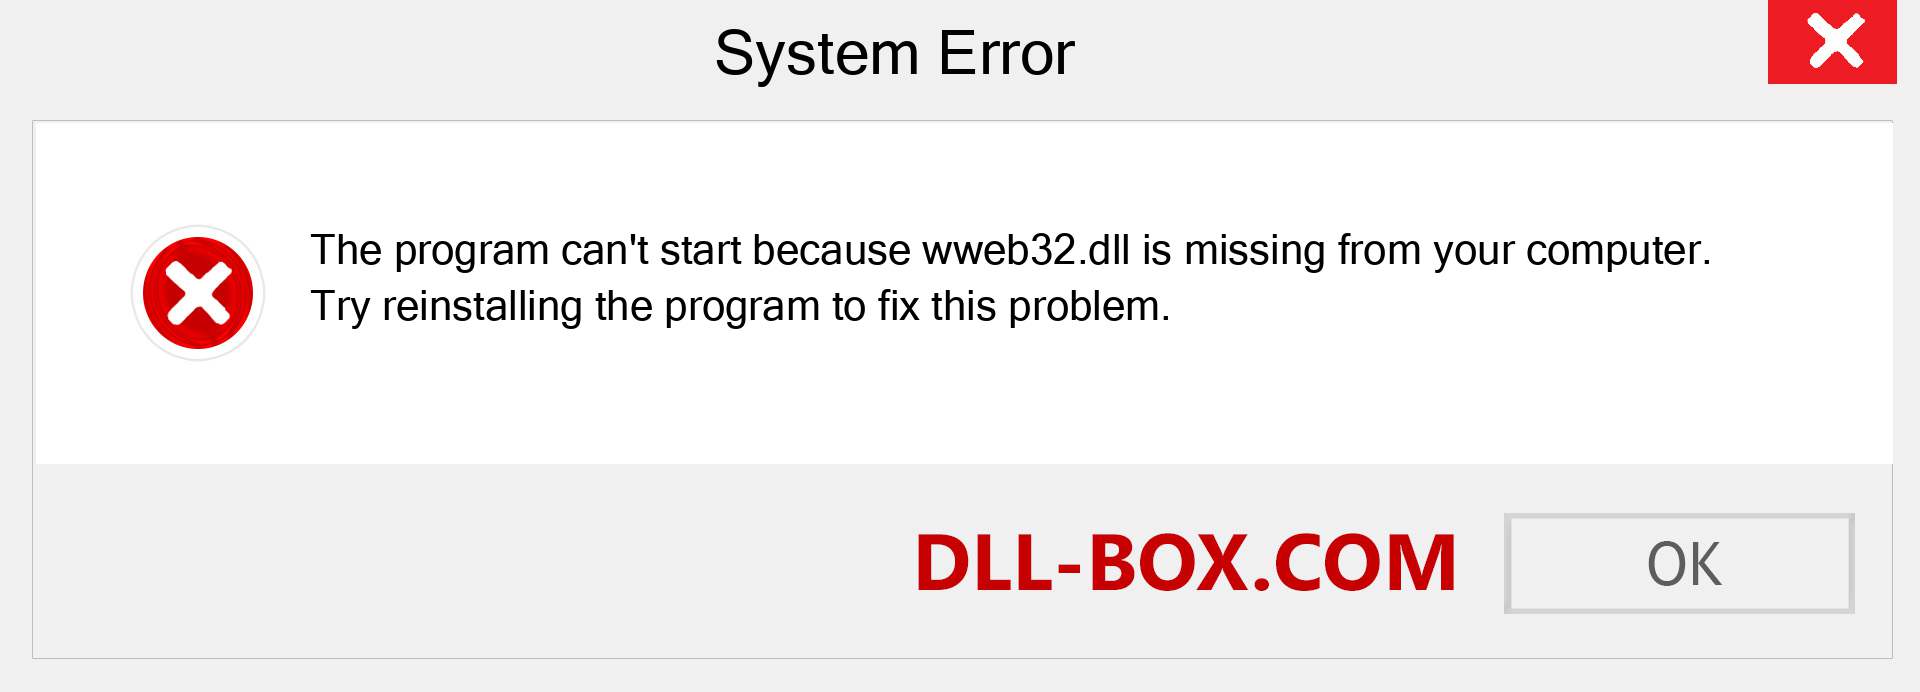  wweb32.dll file is missing?. Download for Windows 7, 8, 10 - Fix  wweb32 dll Missing Error on Windows, photos, images